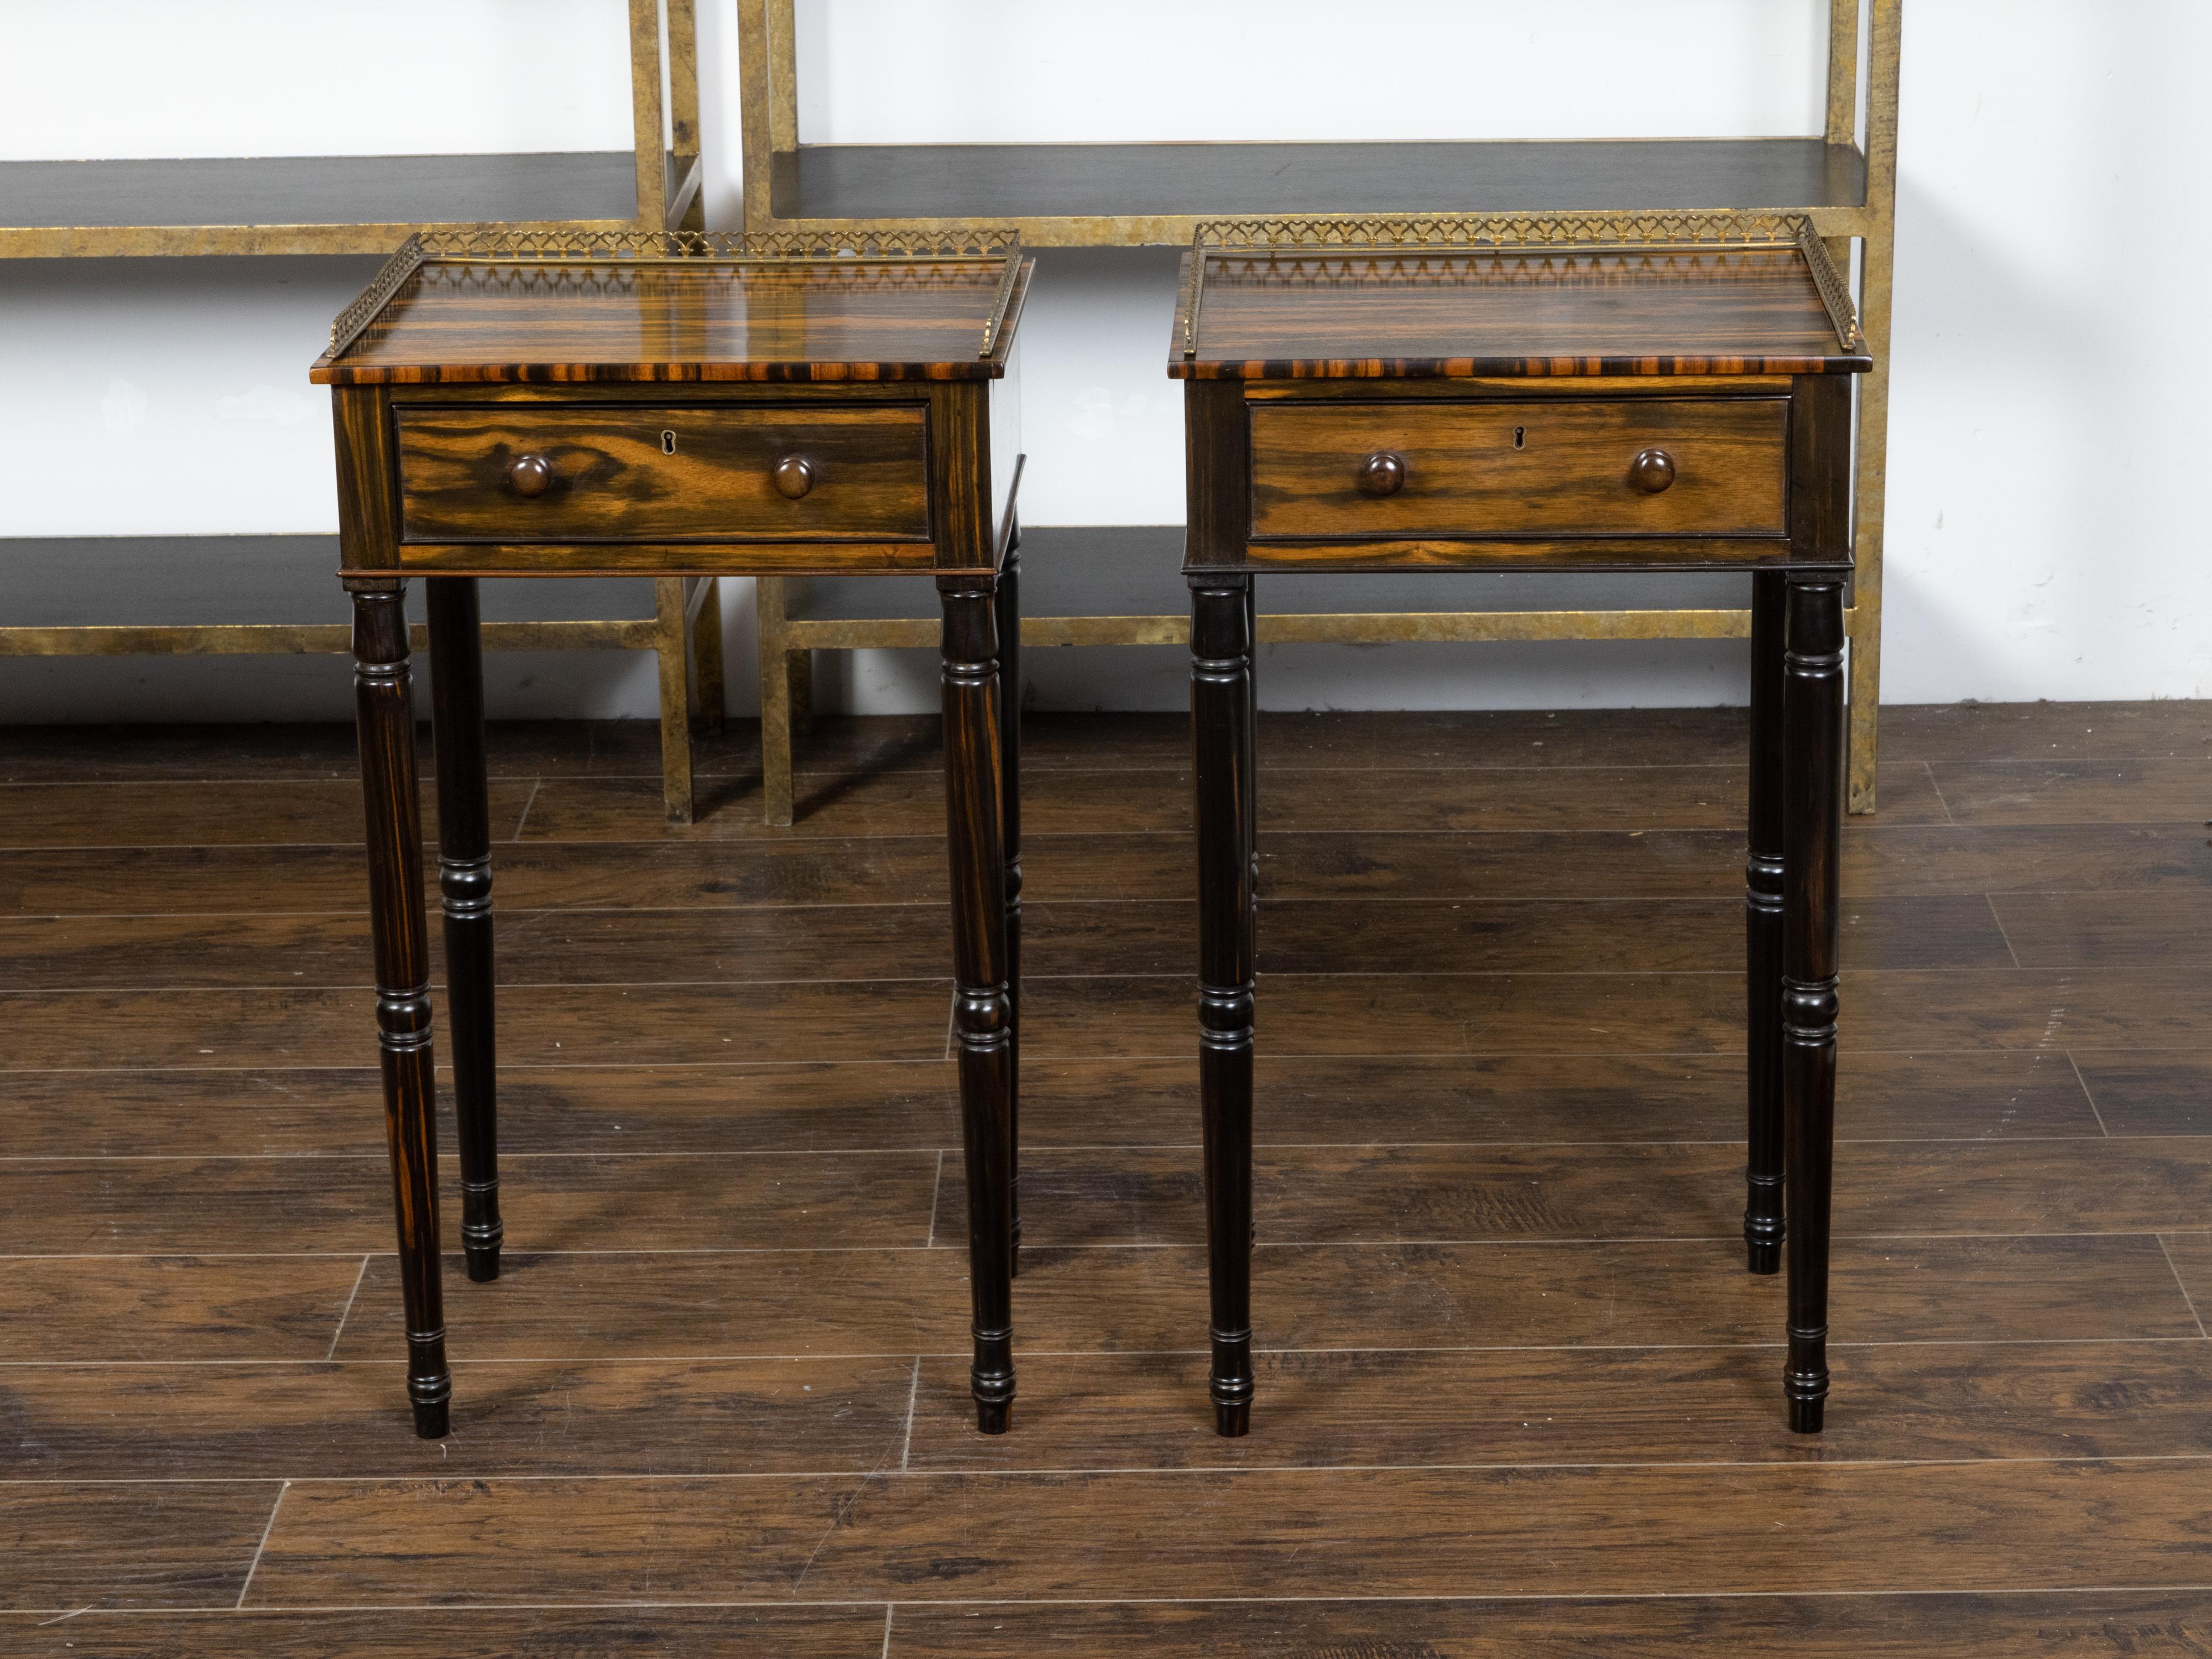 A pair of English Regency period bedside tables from the 19th century, with zebra wood top, single drawer, three-quarter brass gallery and turned legs. Created in England during the Regency period that saw the transition of power between George III